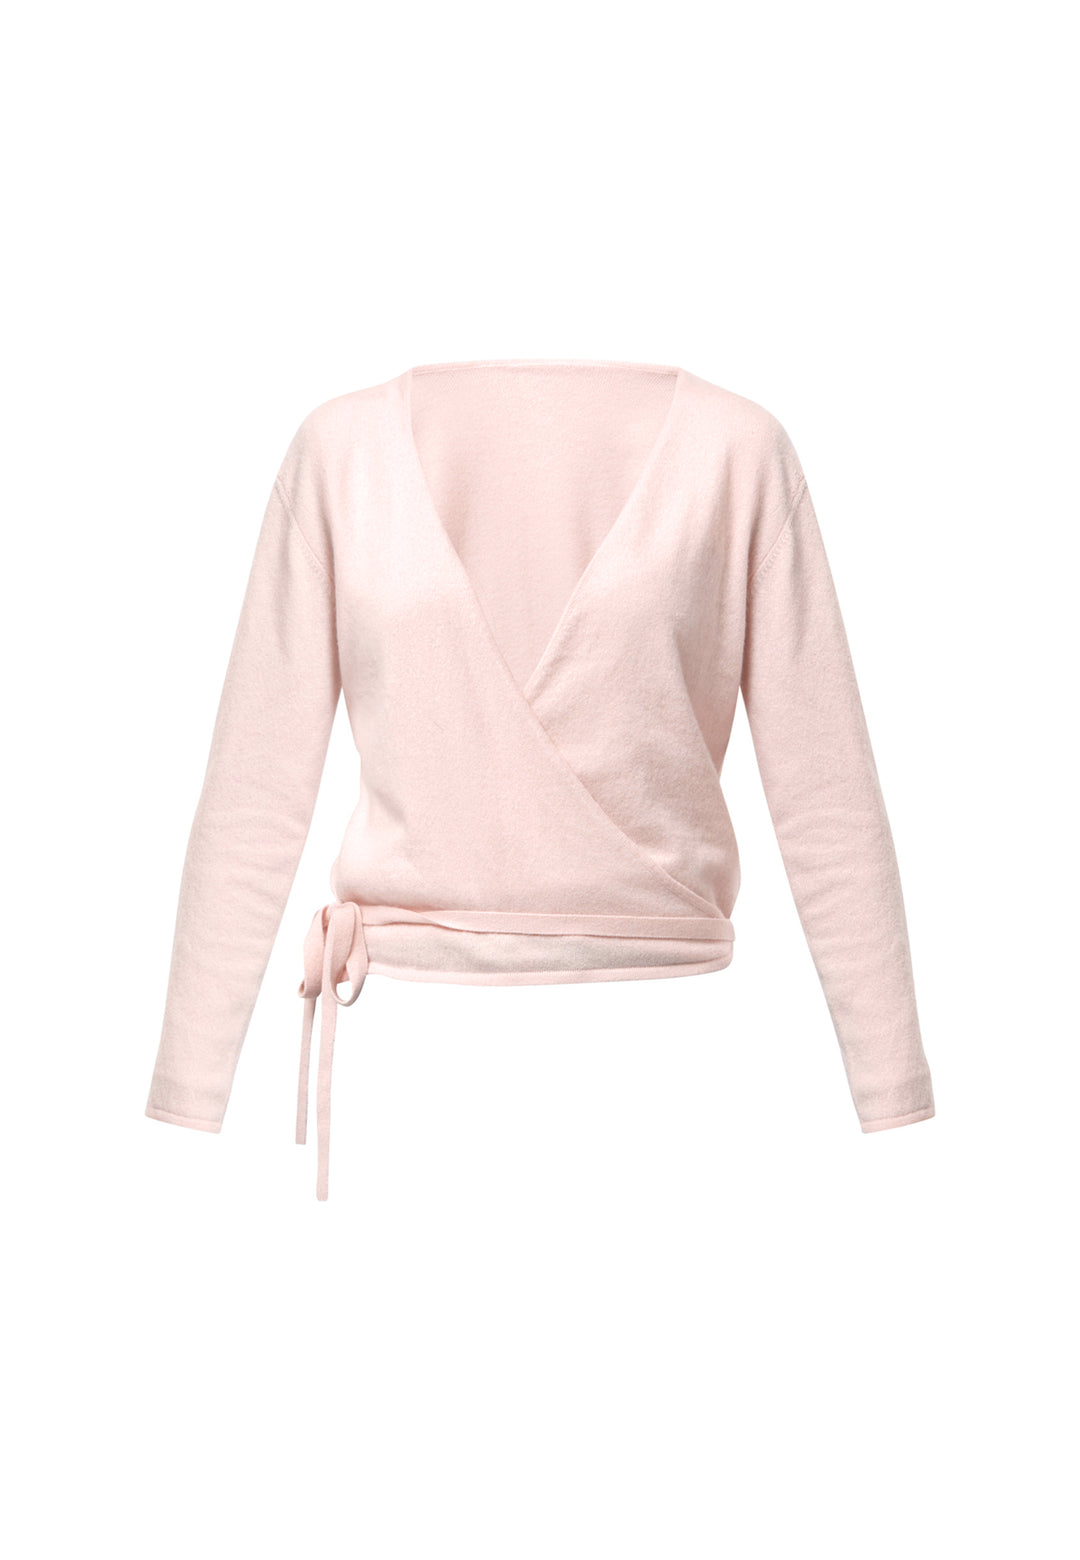 The Siena Petal Pink Cashmere Ballet Wrap is a versatile cardigan designed with a true wrap style. It features full-length sleeves and offers multiple styling options. You can wear it to the front with a V-neckline or to the back with a high neckline and a V-back detail. Made from luxurious cashmere, this wrap can also be layered over the matching Mariena Sleeveless Top for a coordinated and chic ensemble. Embrace the versatility and timeless elegance of the Ballet Wrap.